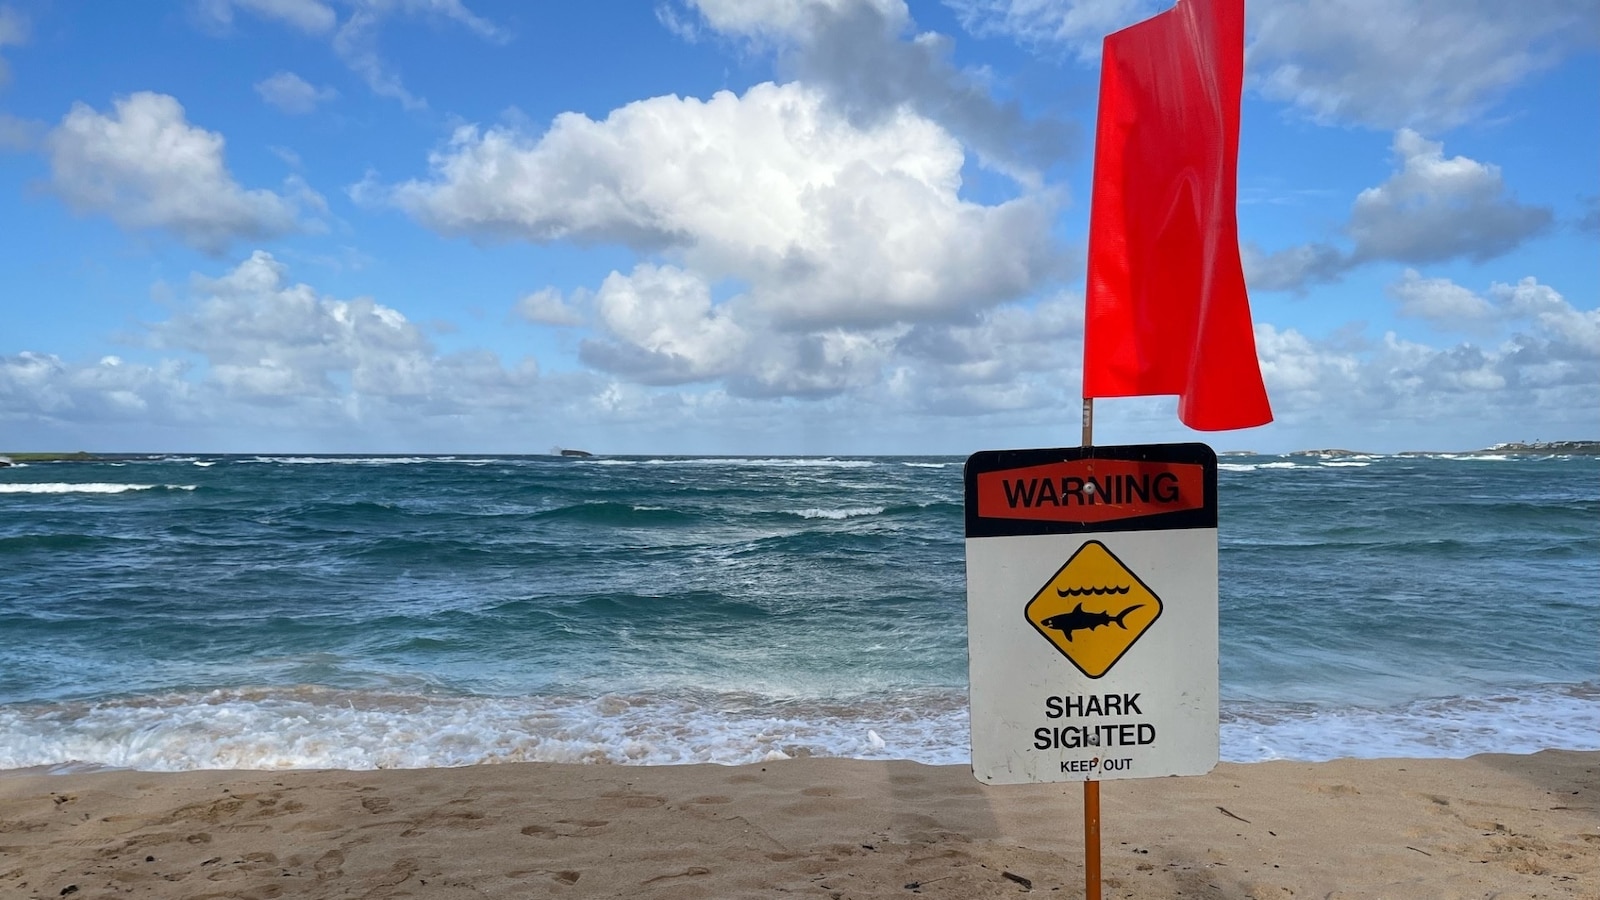 20-year-old injured in potential shark attack in Hawaii [Video]